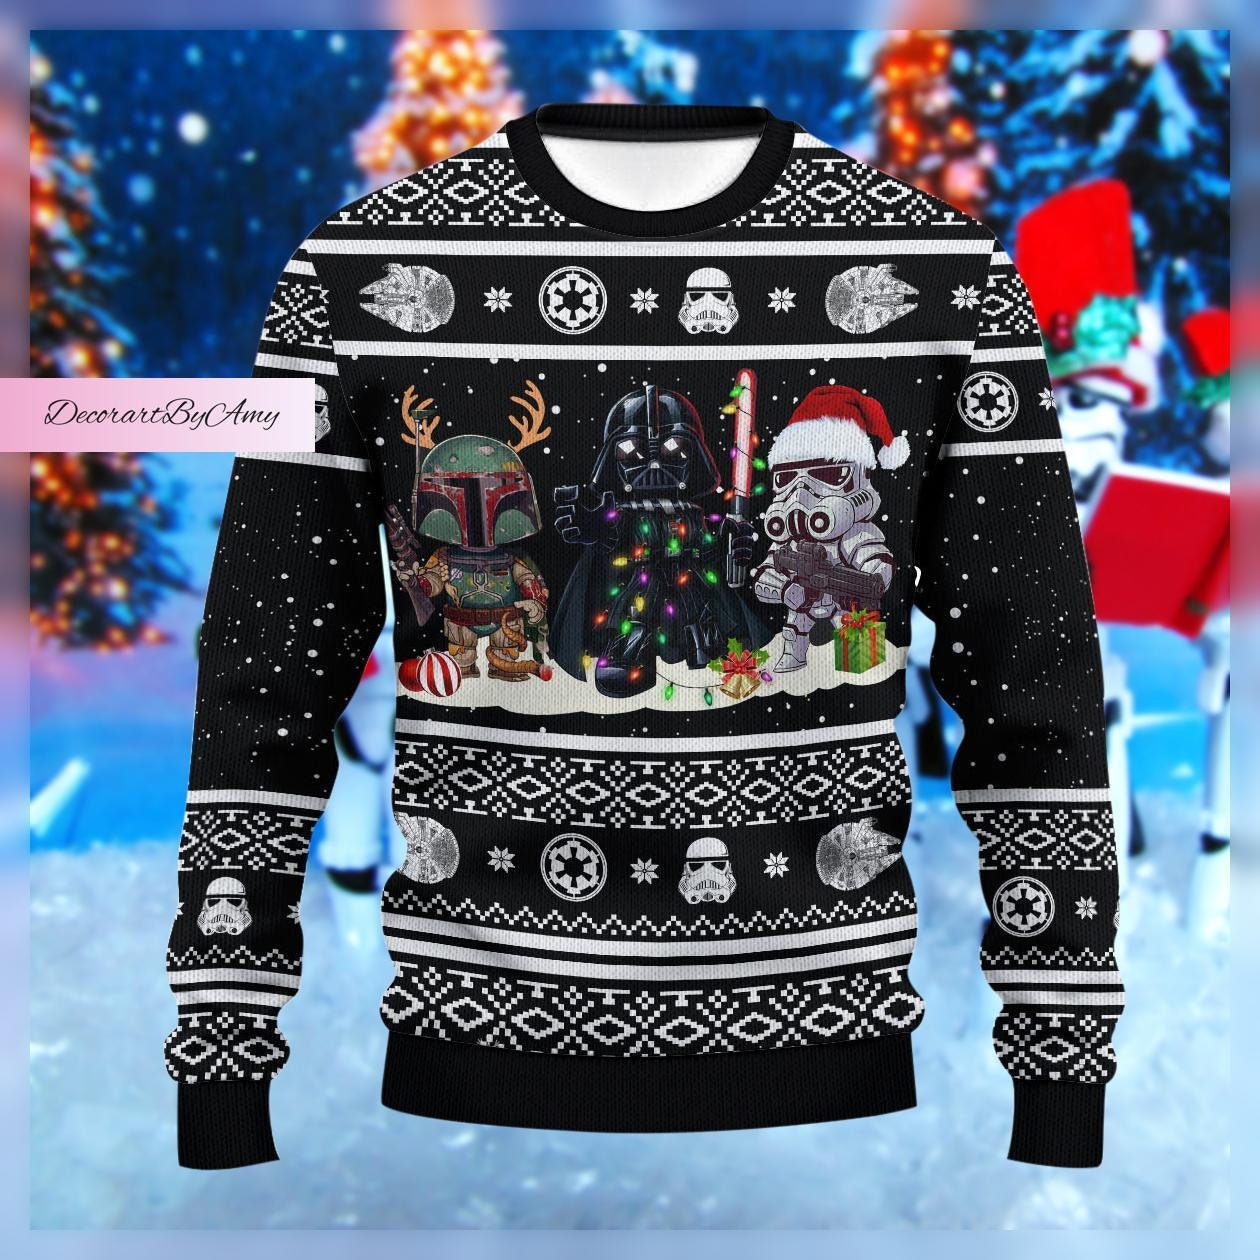 Discover Christmas Star Wars Sweater, Star Wars Ugly Sweater, Darth Vader Men Sweater, Darth Vader Xmas Sweater, Stormtrooper Ugly Xmas Sweater